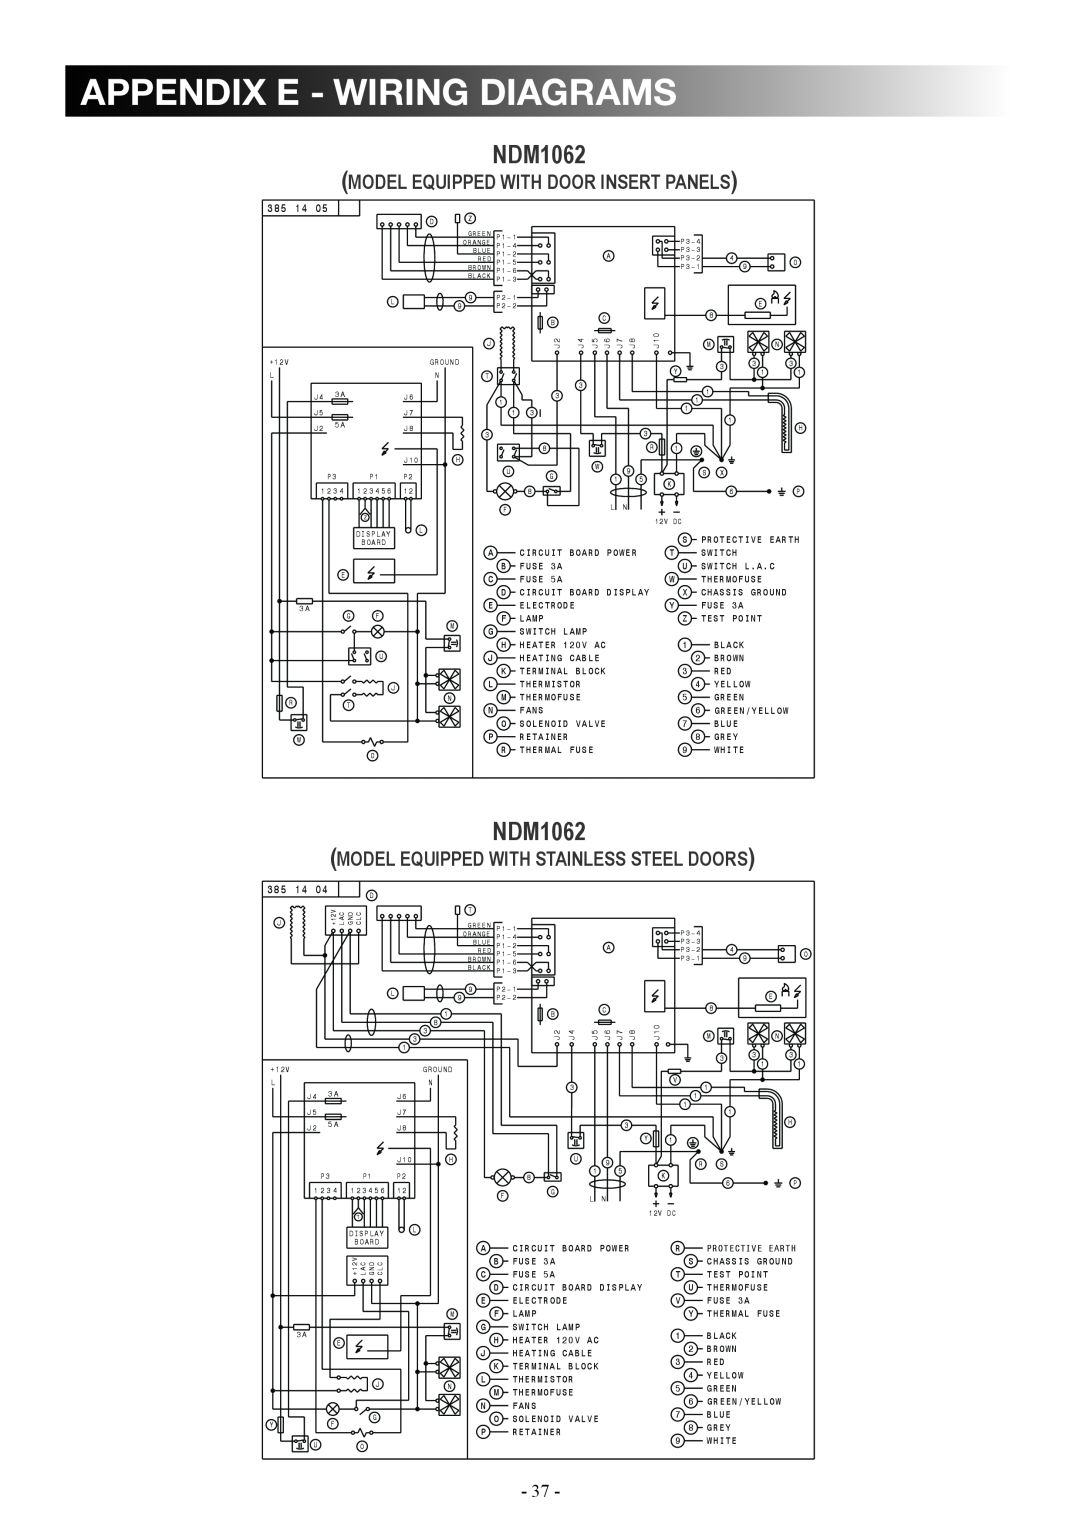 Dometic DM2862 manual appendix e - wiring diagrams, NDM1062, model equipped with door insert panels 